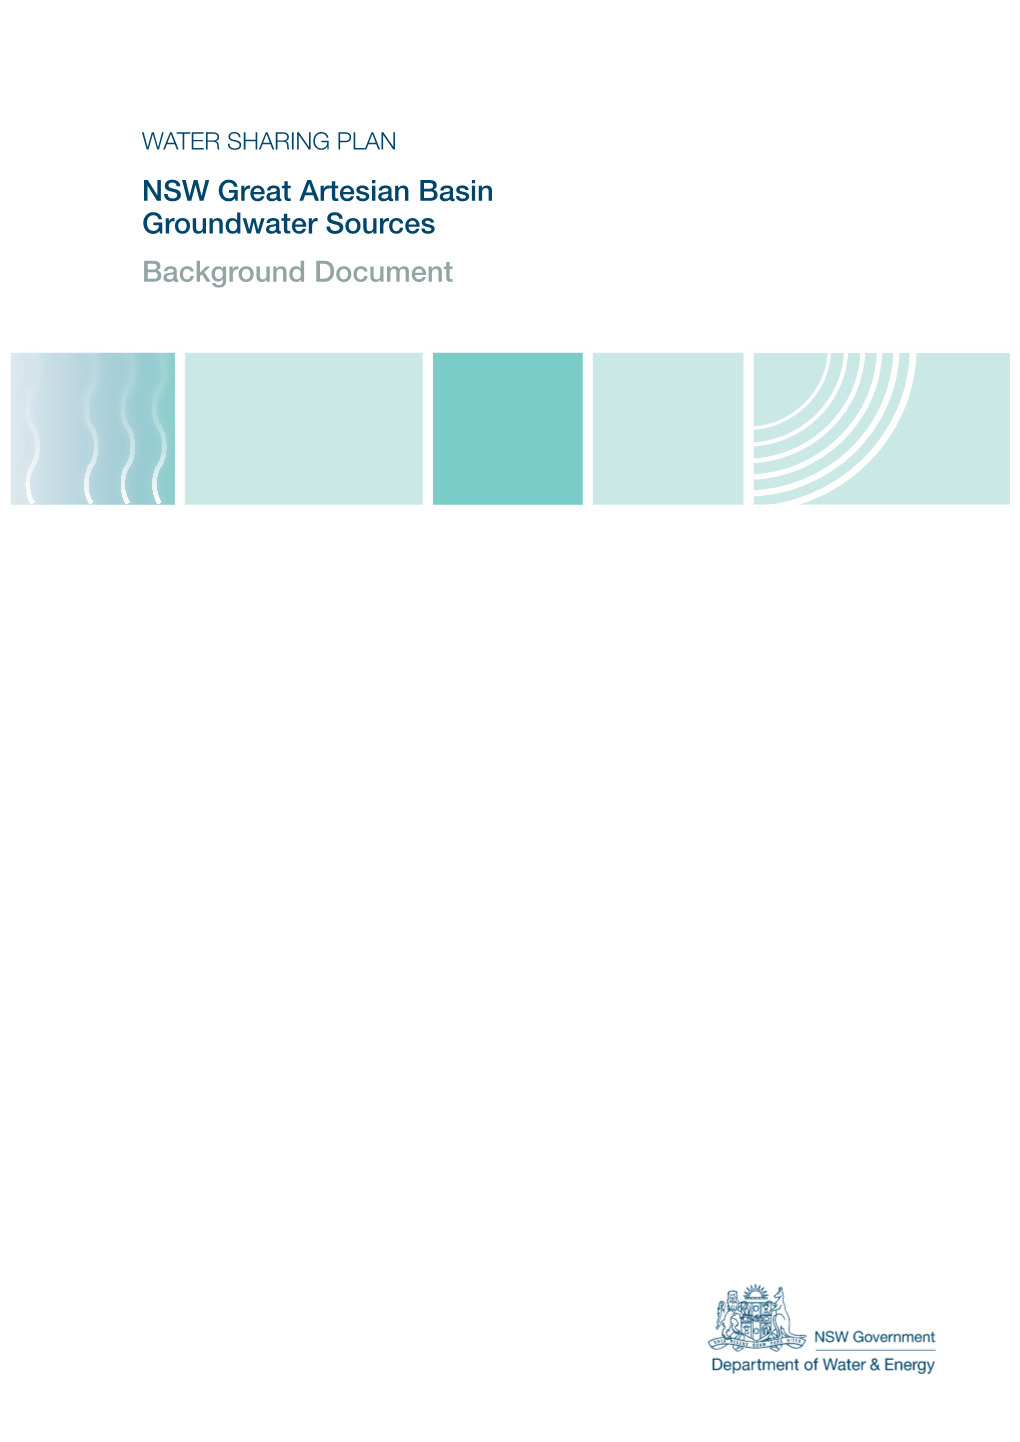 Water Sharing Plan for the NSW Great Artesian Basin Groundwater Sources – Background Document